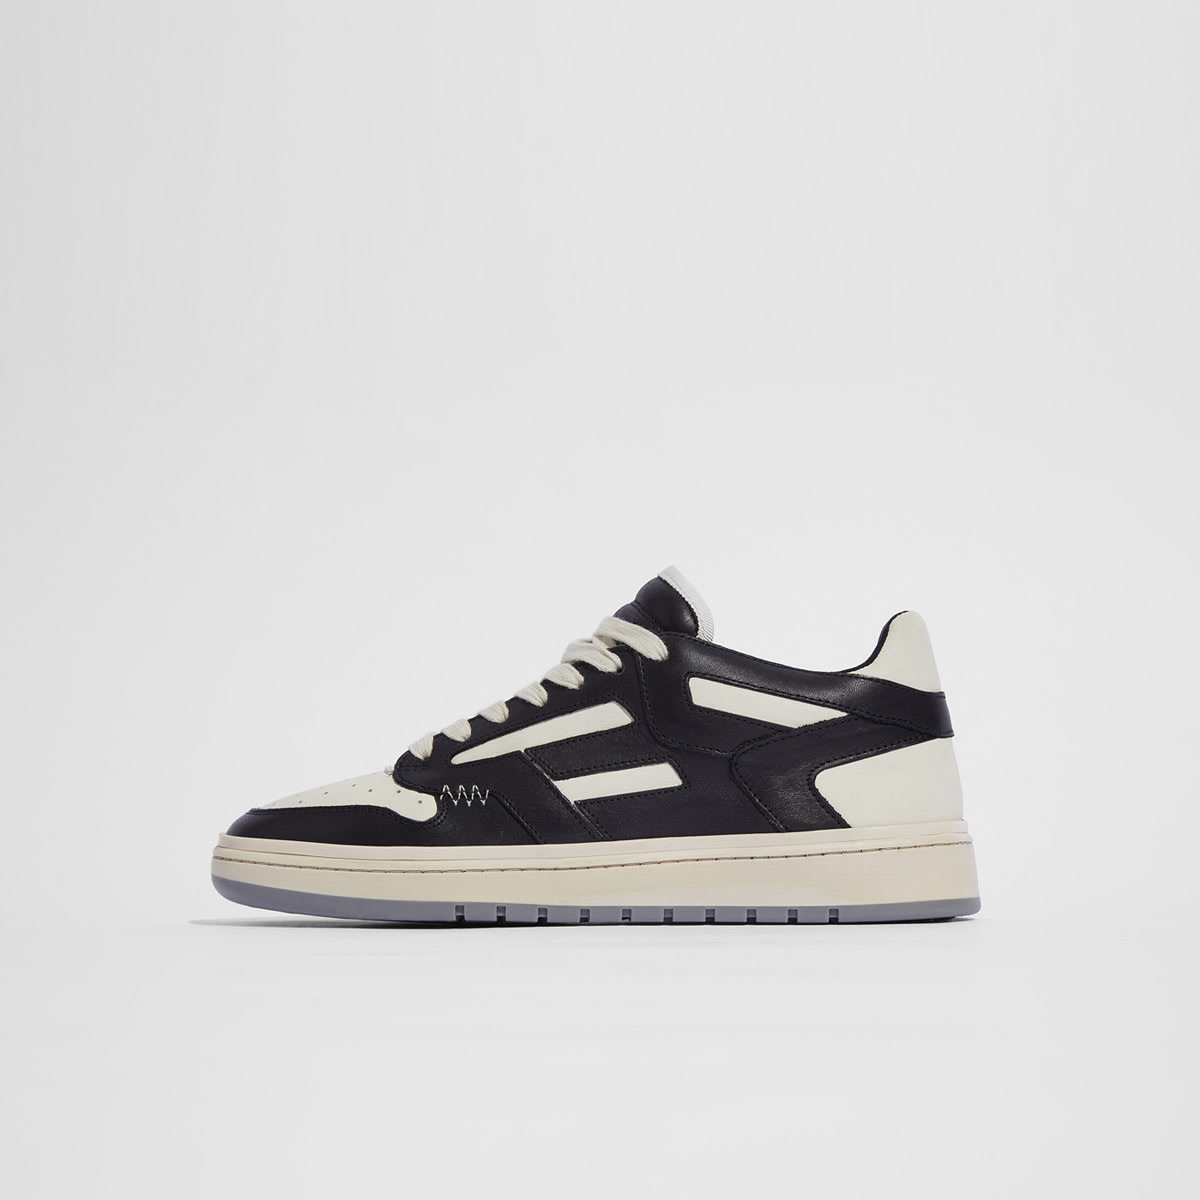 Represent Reptor Low Sneaker (Black & White) | END. Launches